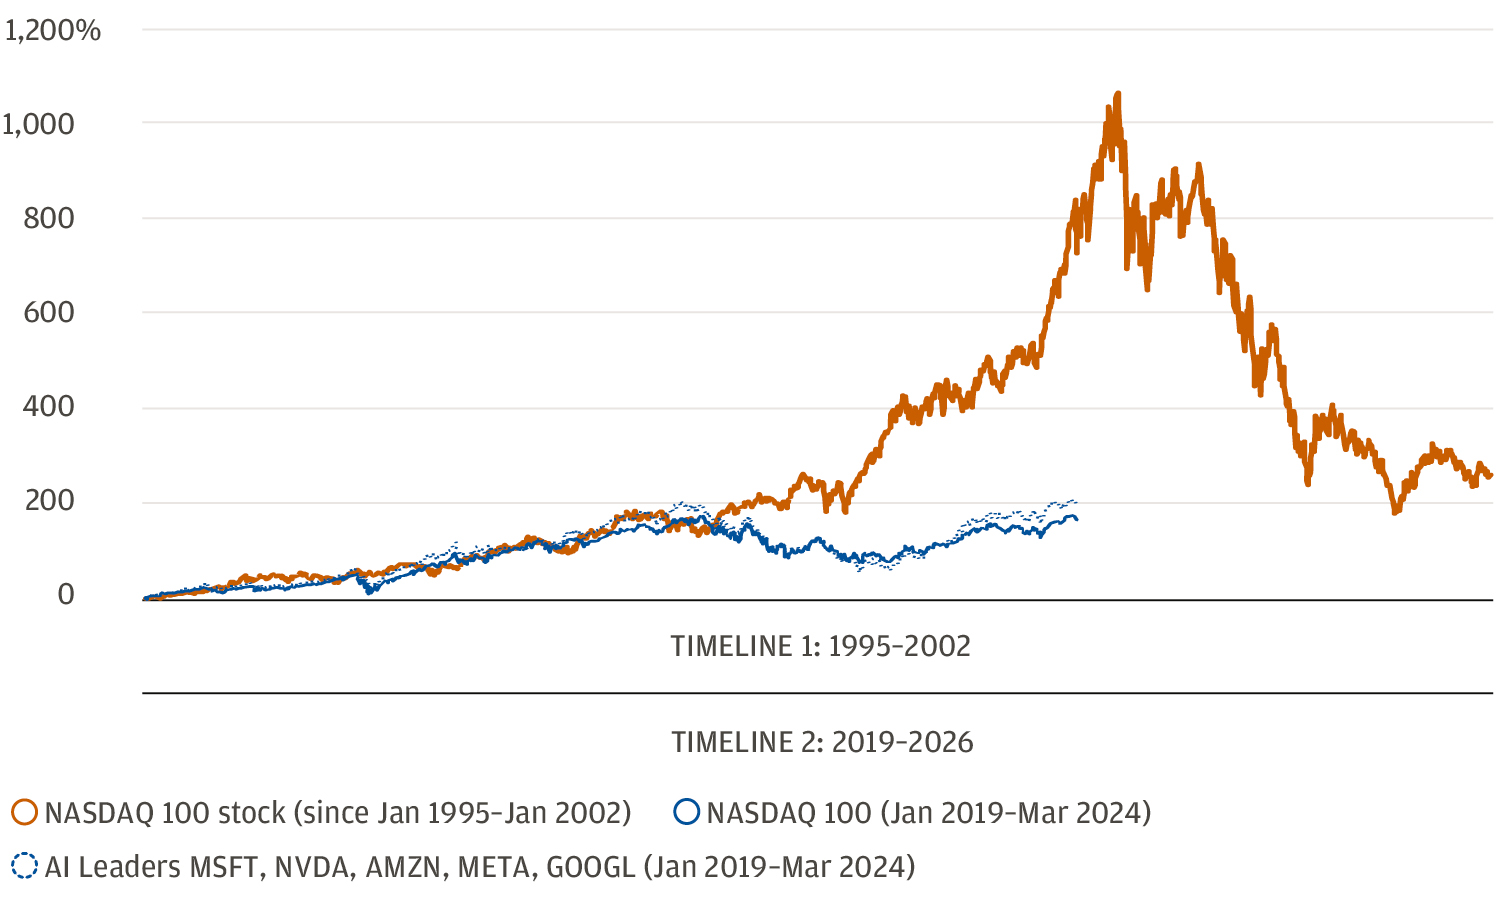 This chart compares the price performance of the NASDAQ 100 and AI leaders of today over the last 5 years versus the performance of the NASDAQ 100 for the 5 years leading up to the bubble. 